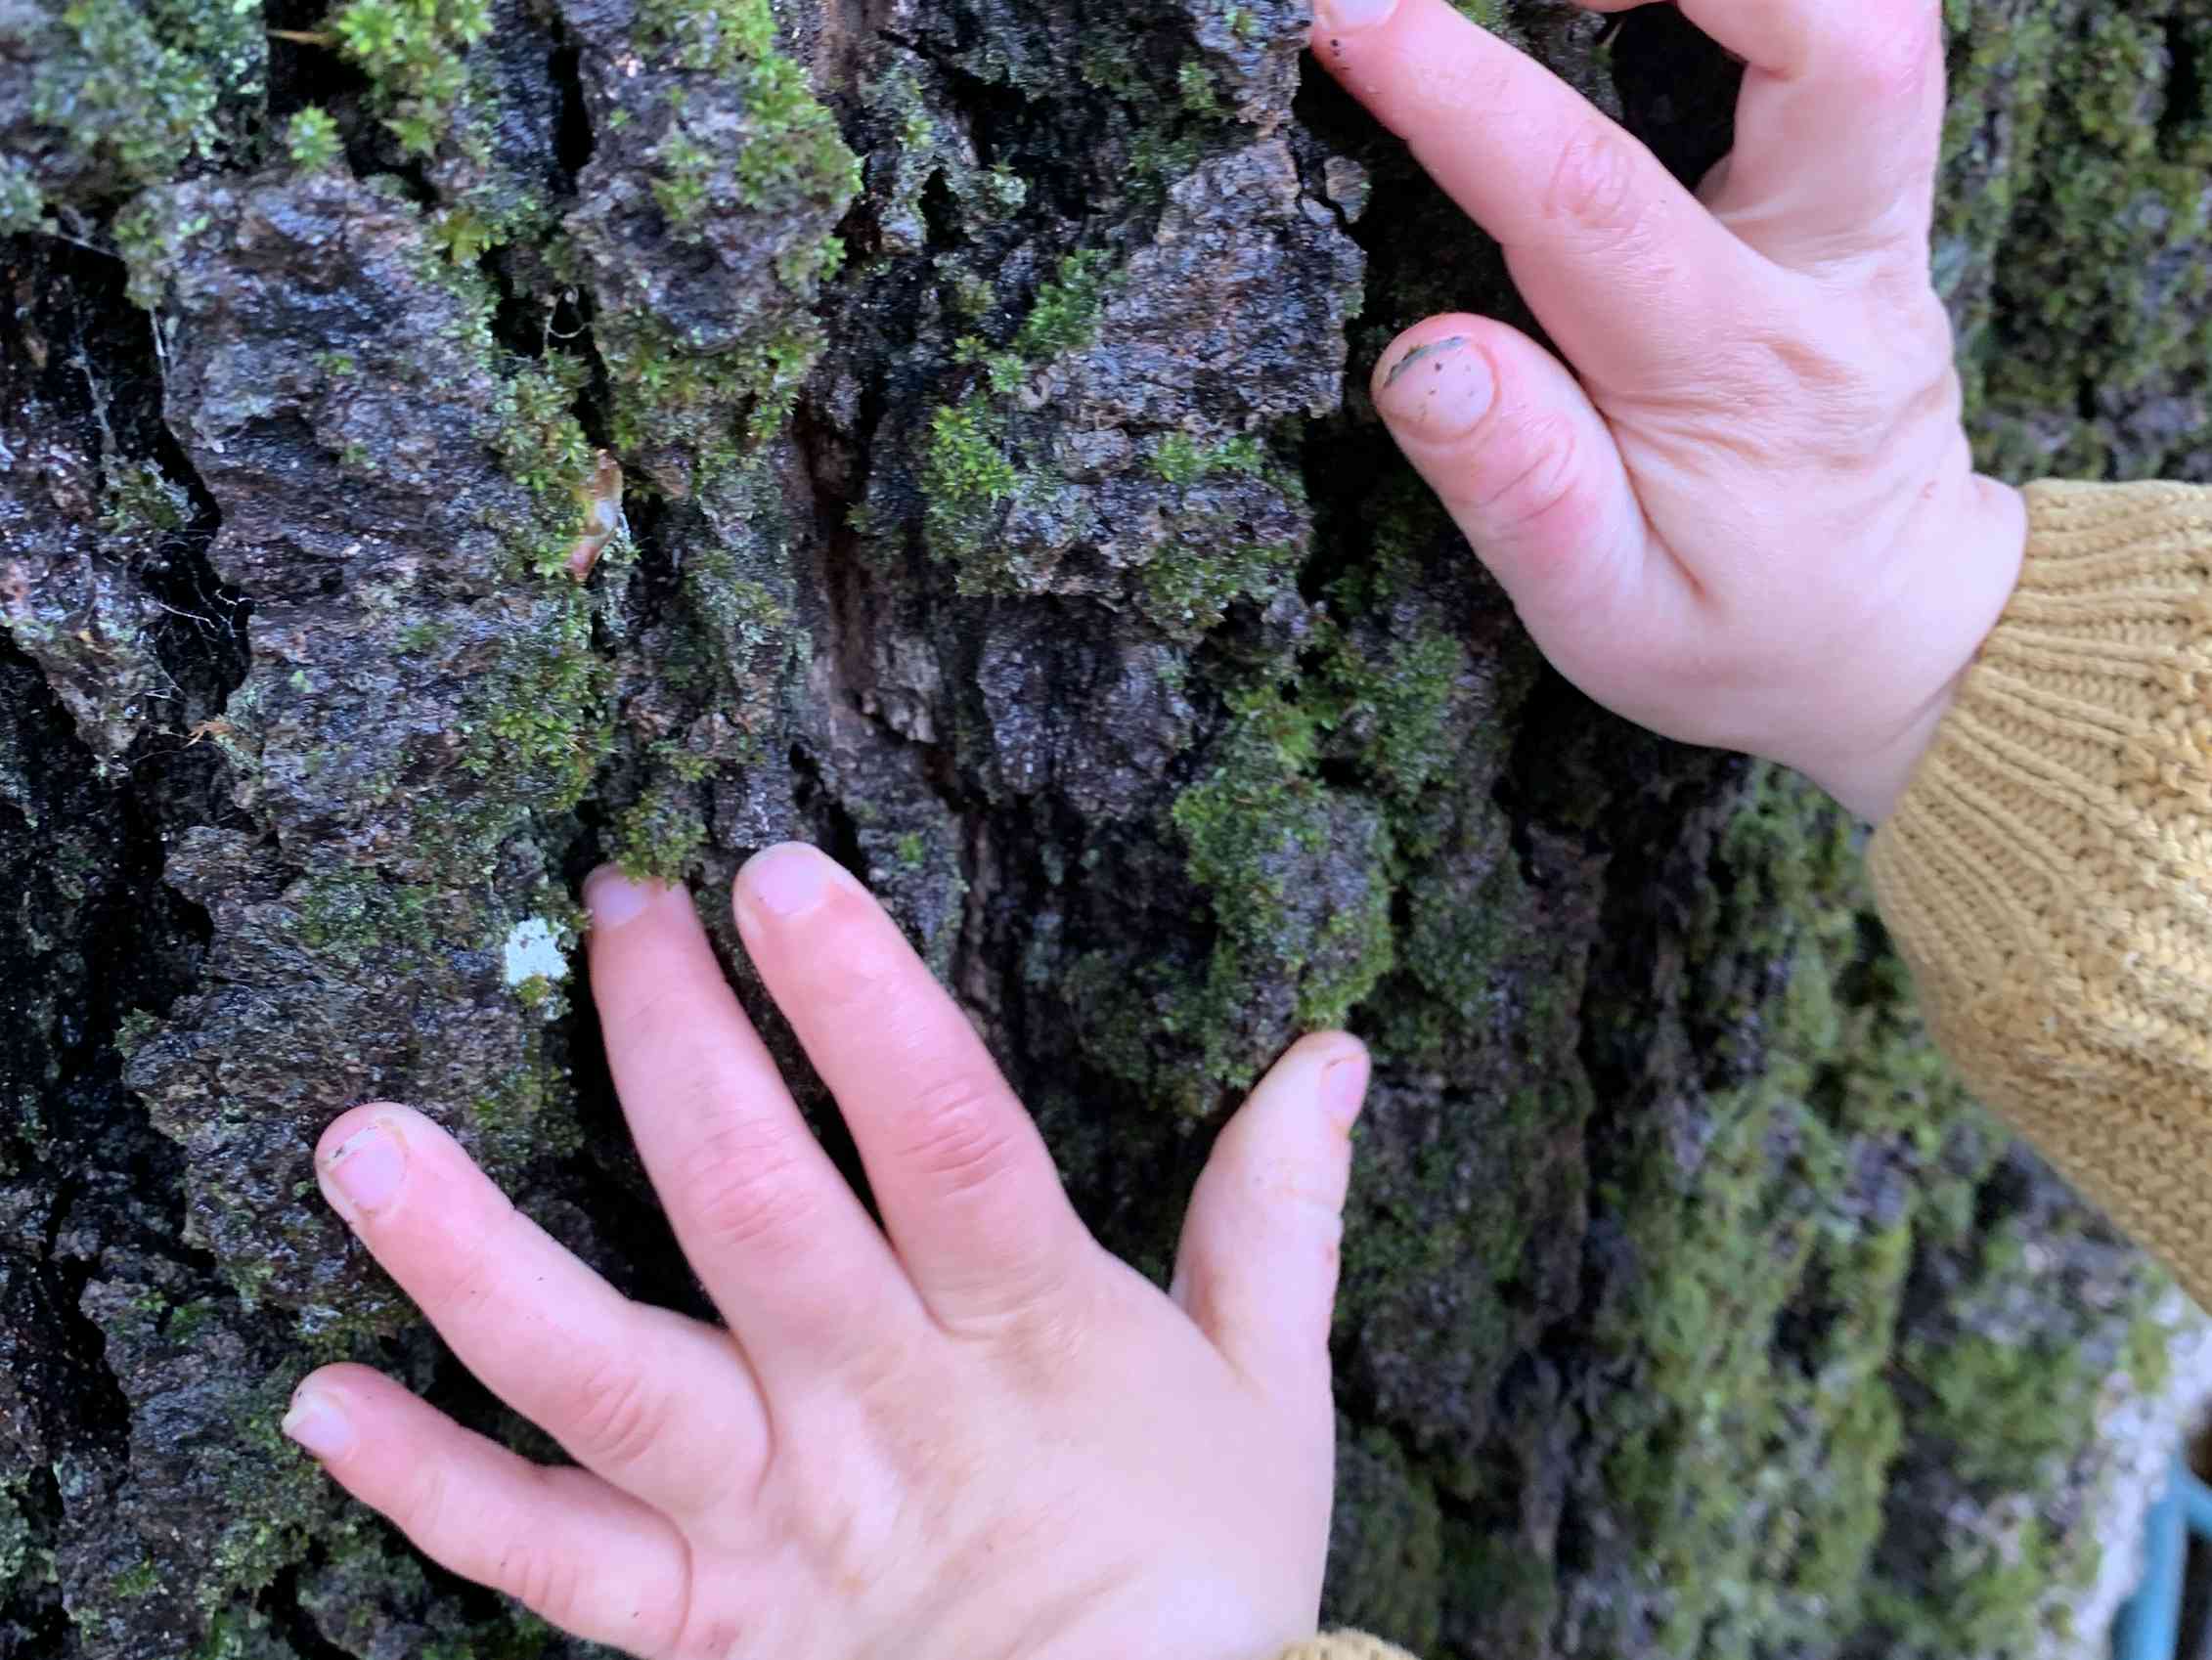 Child's hand touching bark of a tree trunk.